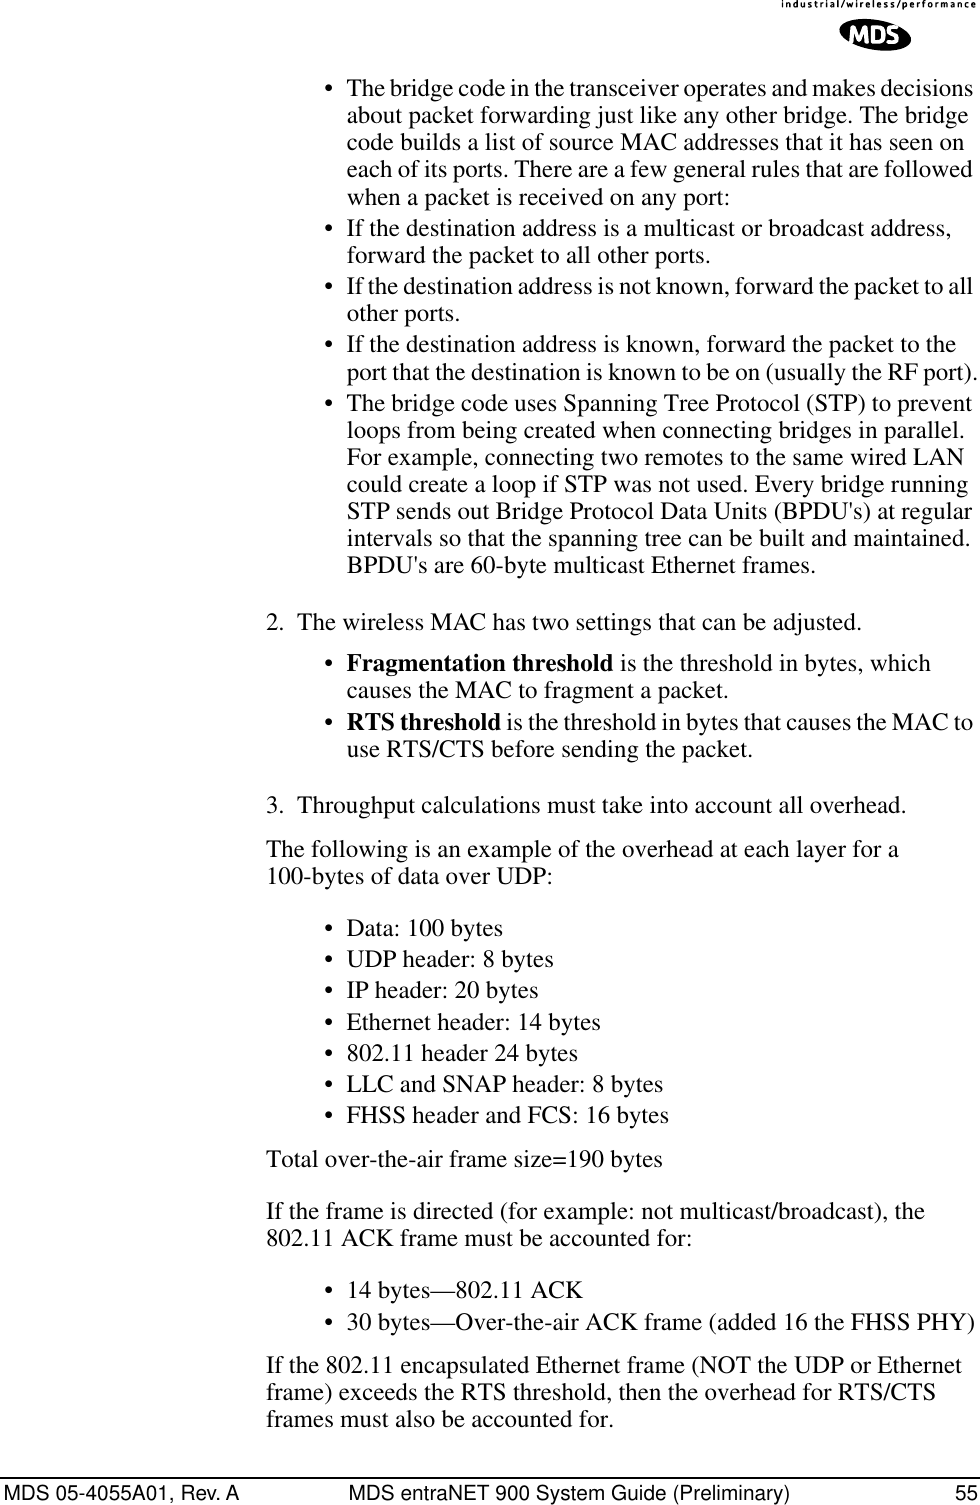 MDS 05-4055A01, Rev. A MDS entraNET 900 System Guide (Preliminary) 55• The bridge code in the transceiver operates and makes decisions about packet forwarding just like any other bridge. The bridge code builds a list of source MAC addresses that it has seen on each of its ports. There are a few general rules that are followed when a packet is received on any port:• If the destination address is a multicast or broadcast address, forward the packet to all other ports.• If the destination address is not known, forward the packet to all other ports. • If the destination address is known, forward the packet to the port that the destination is known to be on (usually the RF port).• The bridge code uses Spanning Tree Protocol (STP) to prevent loops from being created when connecting bridges in parallel. For example, connecting two remotes to the same wired LAN could create a loop if STP was not used. Every bridge running STP sends out Bridge Protocol Data Units (BPDU&apos;s) at regular intervals so that the spanning tree can be built and maintained. BPDU&apos;s are 60-byte multicast Ethernet frames.2. The wireless MAC has two settings that can be adjusted.•Fragmentation threshold is the threshold in bytes, which causes the MAC to fragment a packet.•RTS threshold is the threshold in bytes that causes the MAC to use RTS/CTS before sending the packet.3. Throughput calculations must take into account all overhead.The following is an example of the overhead at each layer for a 100-bytes of data over UDP:• Data: 100 bytes• UDP header: 8 bytes• IP header: 20 bytes• Ethernet header: 14 bytes• 802.11 header 24 bytes • LLC and SNAP header: 8 bytes• FHSS header and FCS: 16 bytesTotal over-the-air frame size=190 bytesIf the frame is directed (for example: not multicast/broadcast), the 802.11 ACK frame must be accounted for:• 14 bytes—802.11 ACK• 30 bytes—Over-the-air ACK frame (added 16 the FHSS PHY)If the 802.11 encapsulated Ethernet frame (NOT the UDP or Ethernet frame) exceeds the RTS threshold, then the overhead for RTS/CTS frames must also be accounted for.